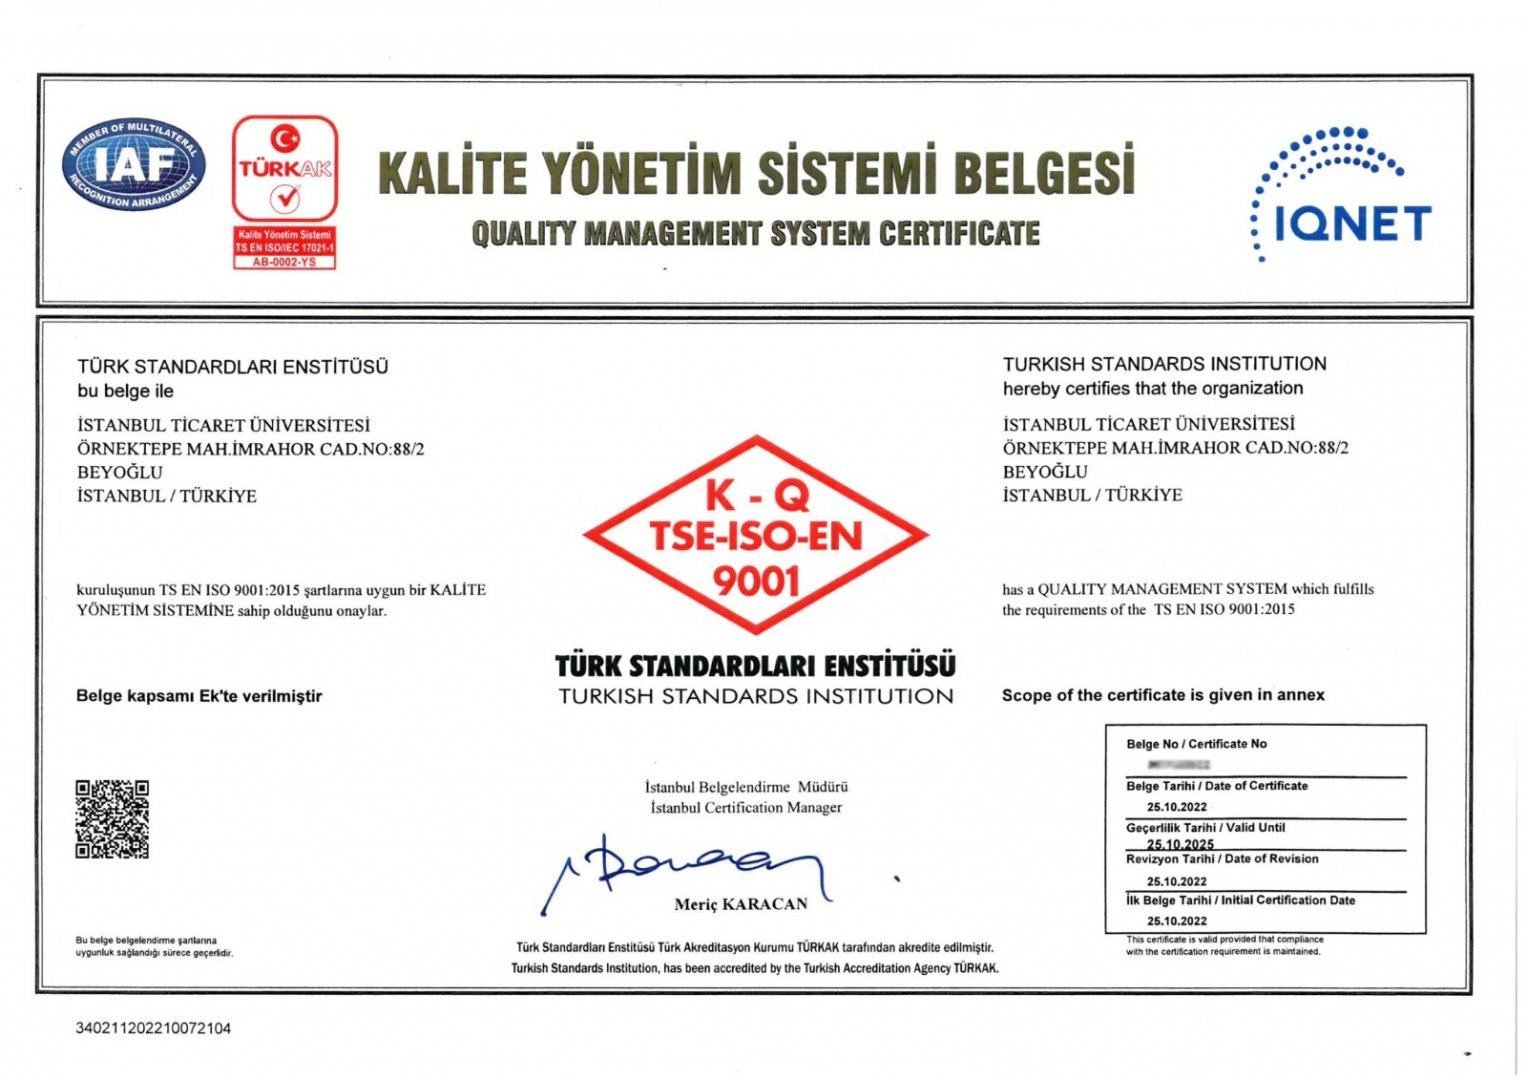 Istanbul Commerce University obtains quality management system certificate